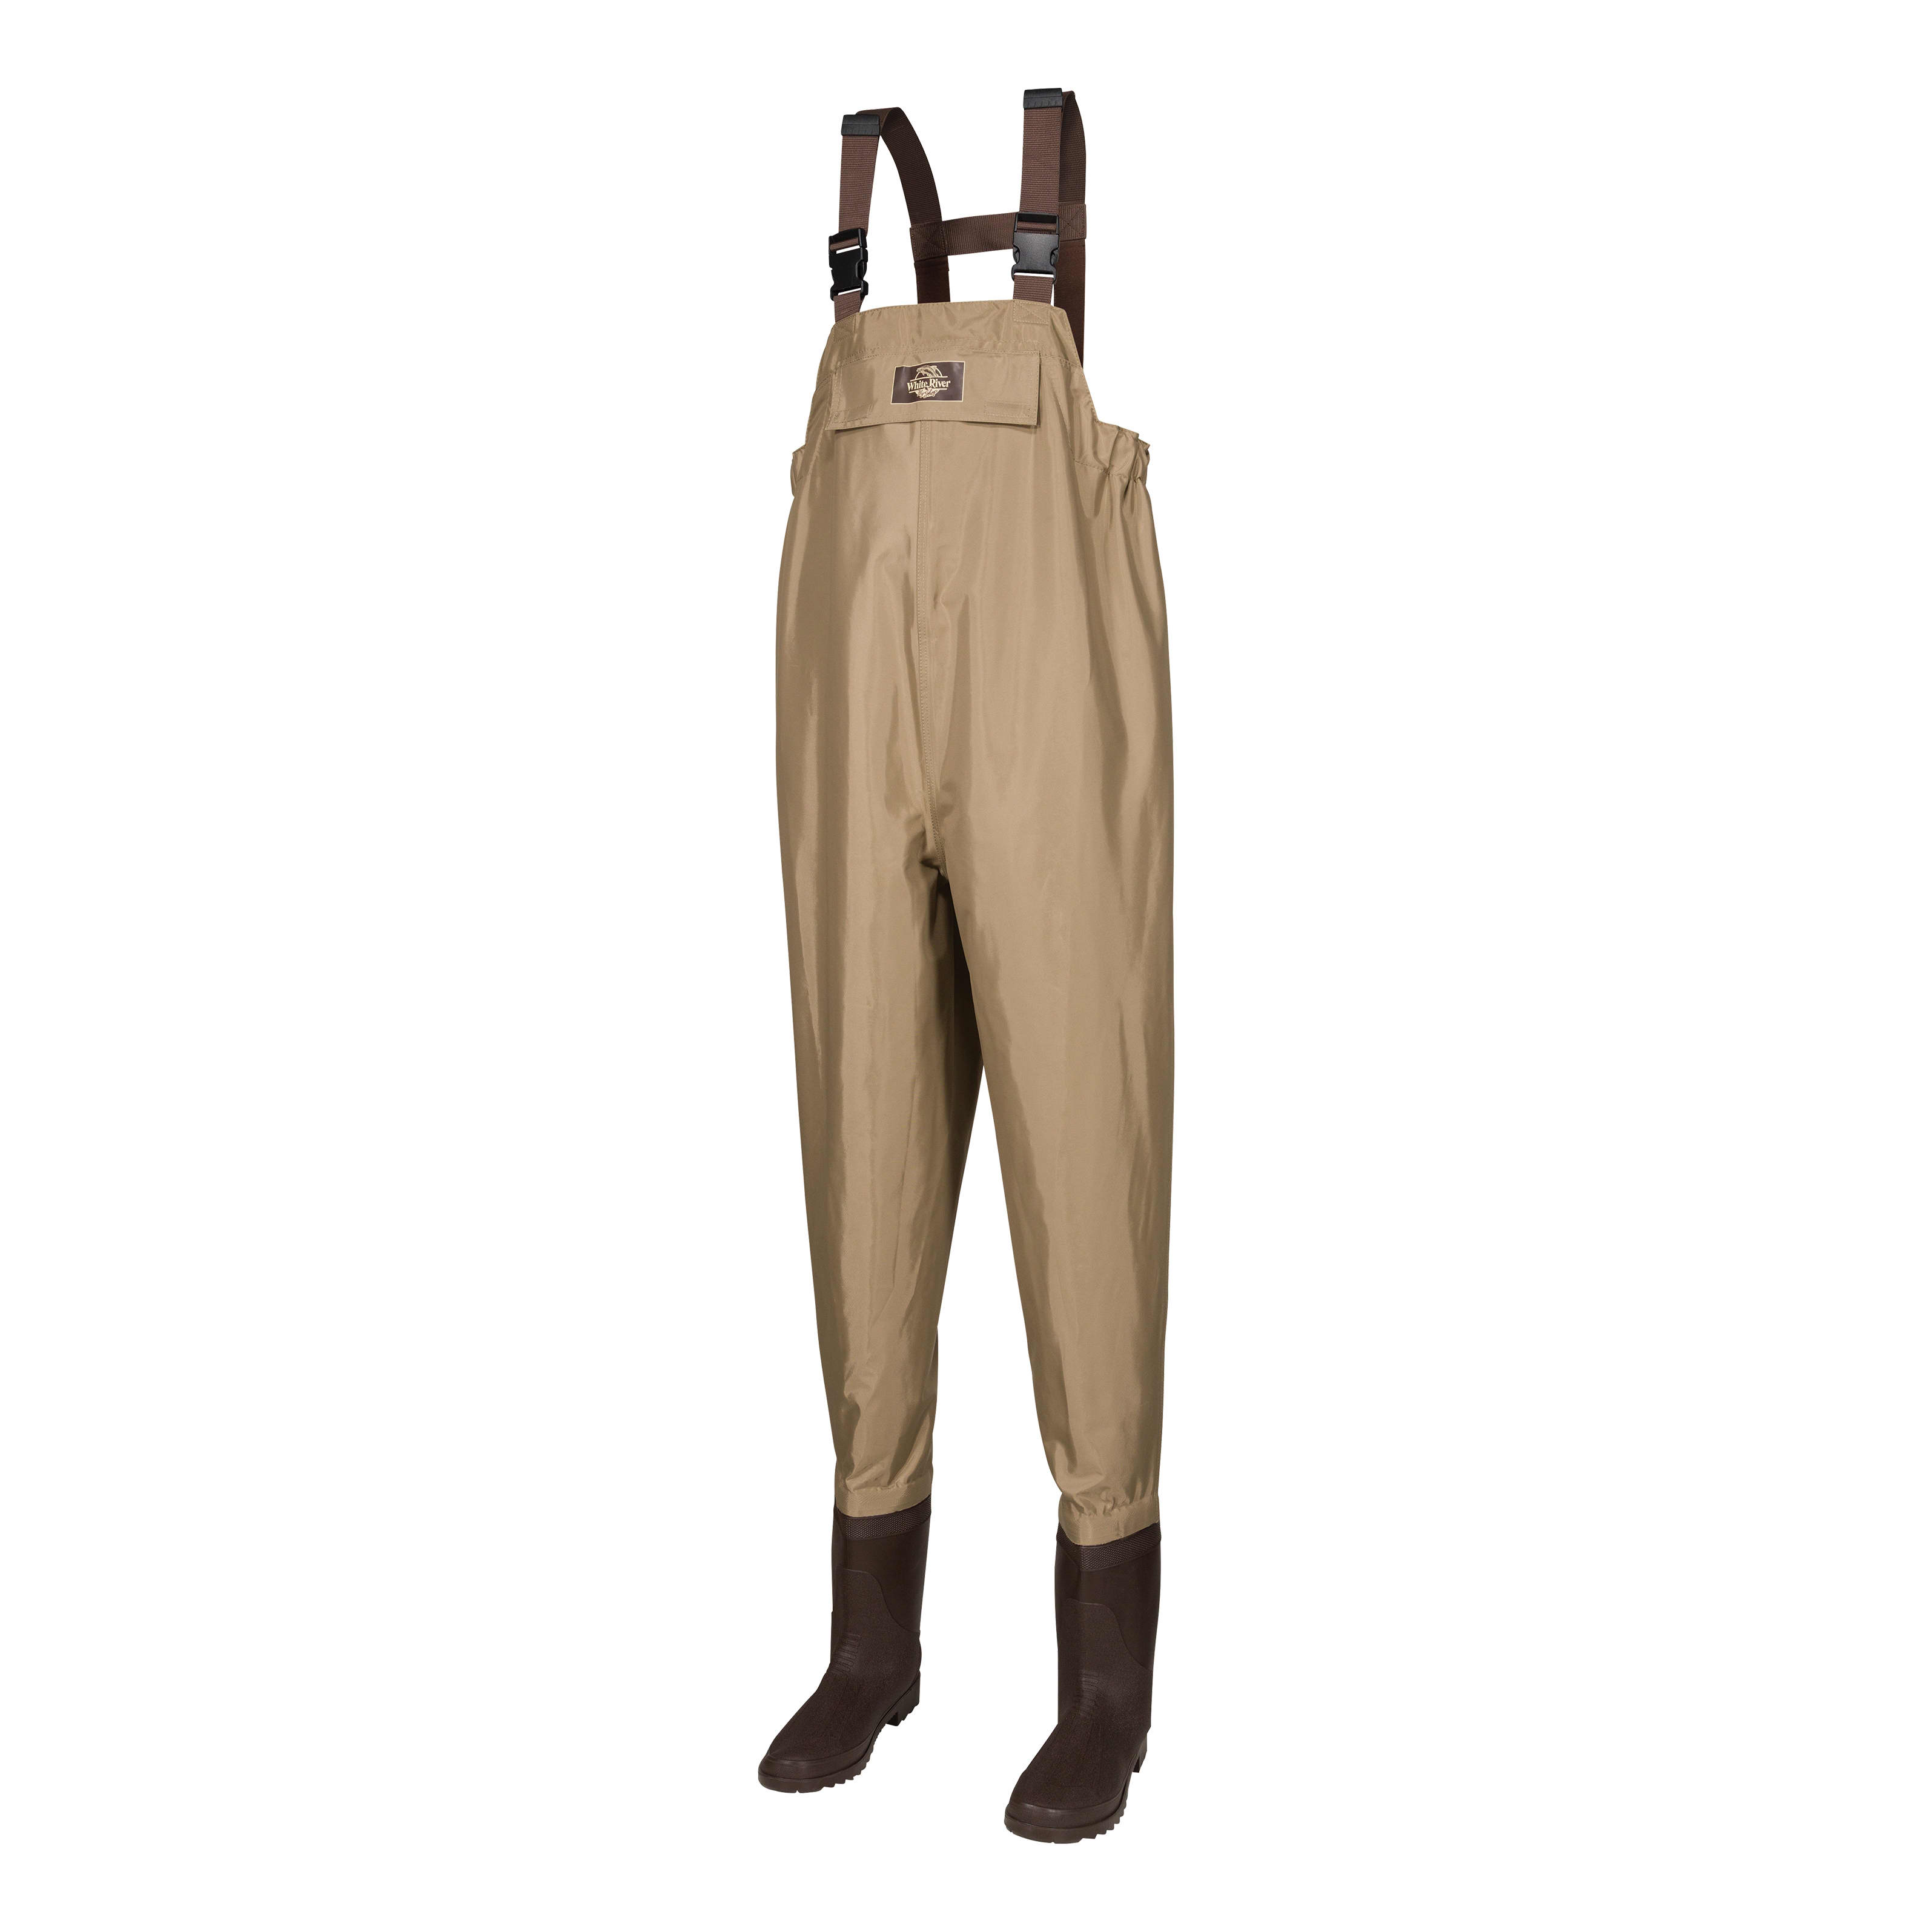 Snowbee Classic Neoprene Stocking foot Chest Waders - Foxons Fishing Tackle